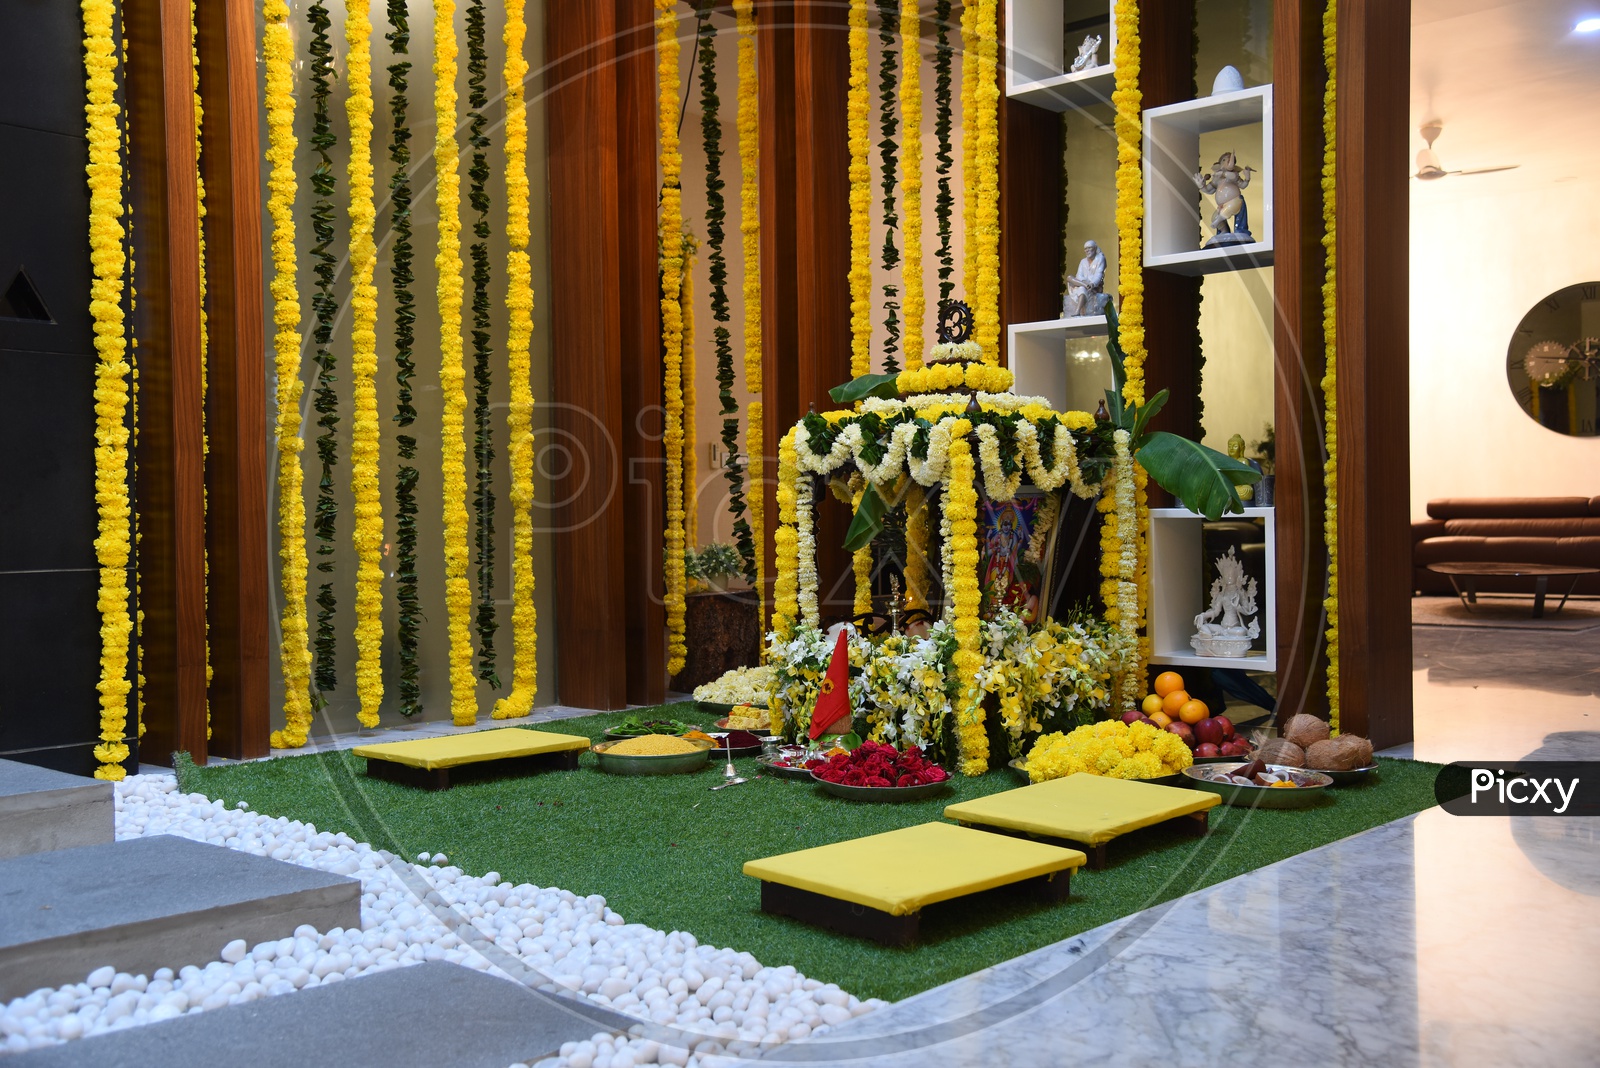 Hindu Pooja With God Photo frames And Flower Decoration